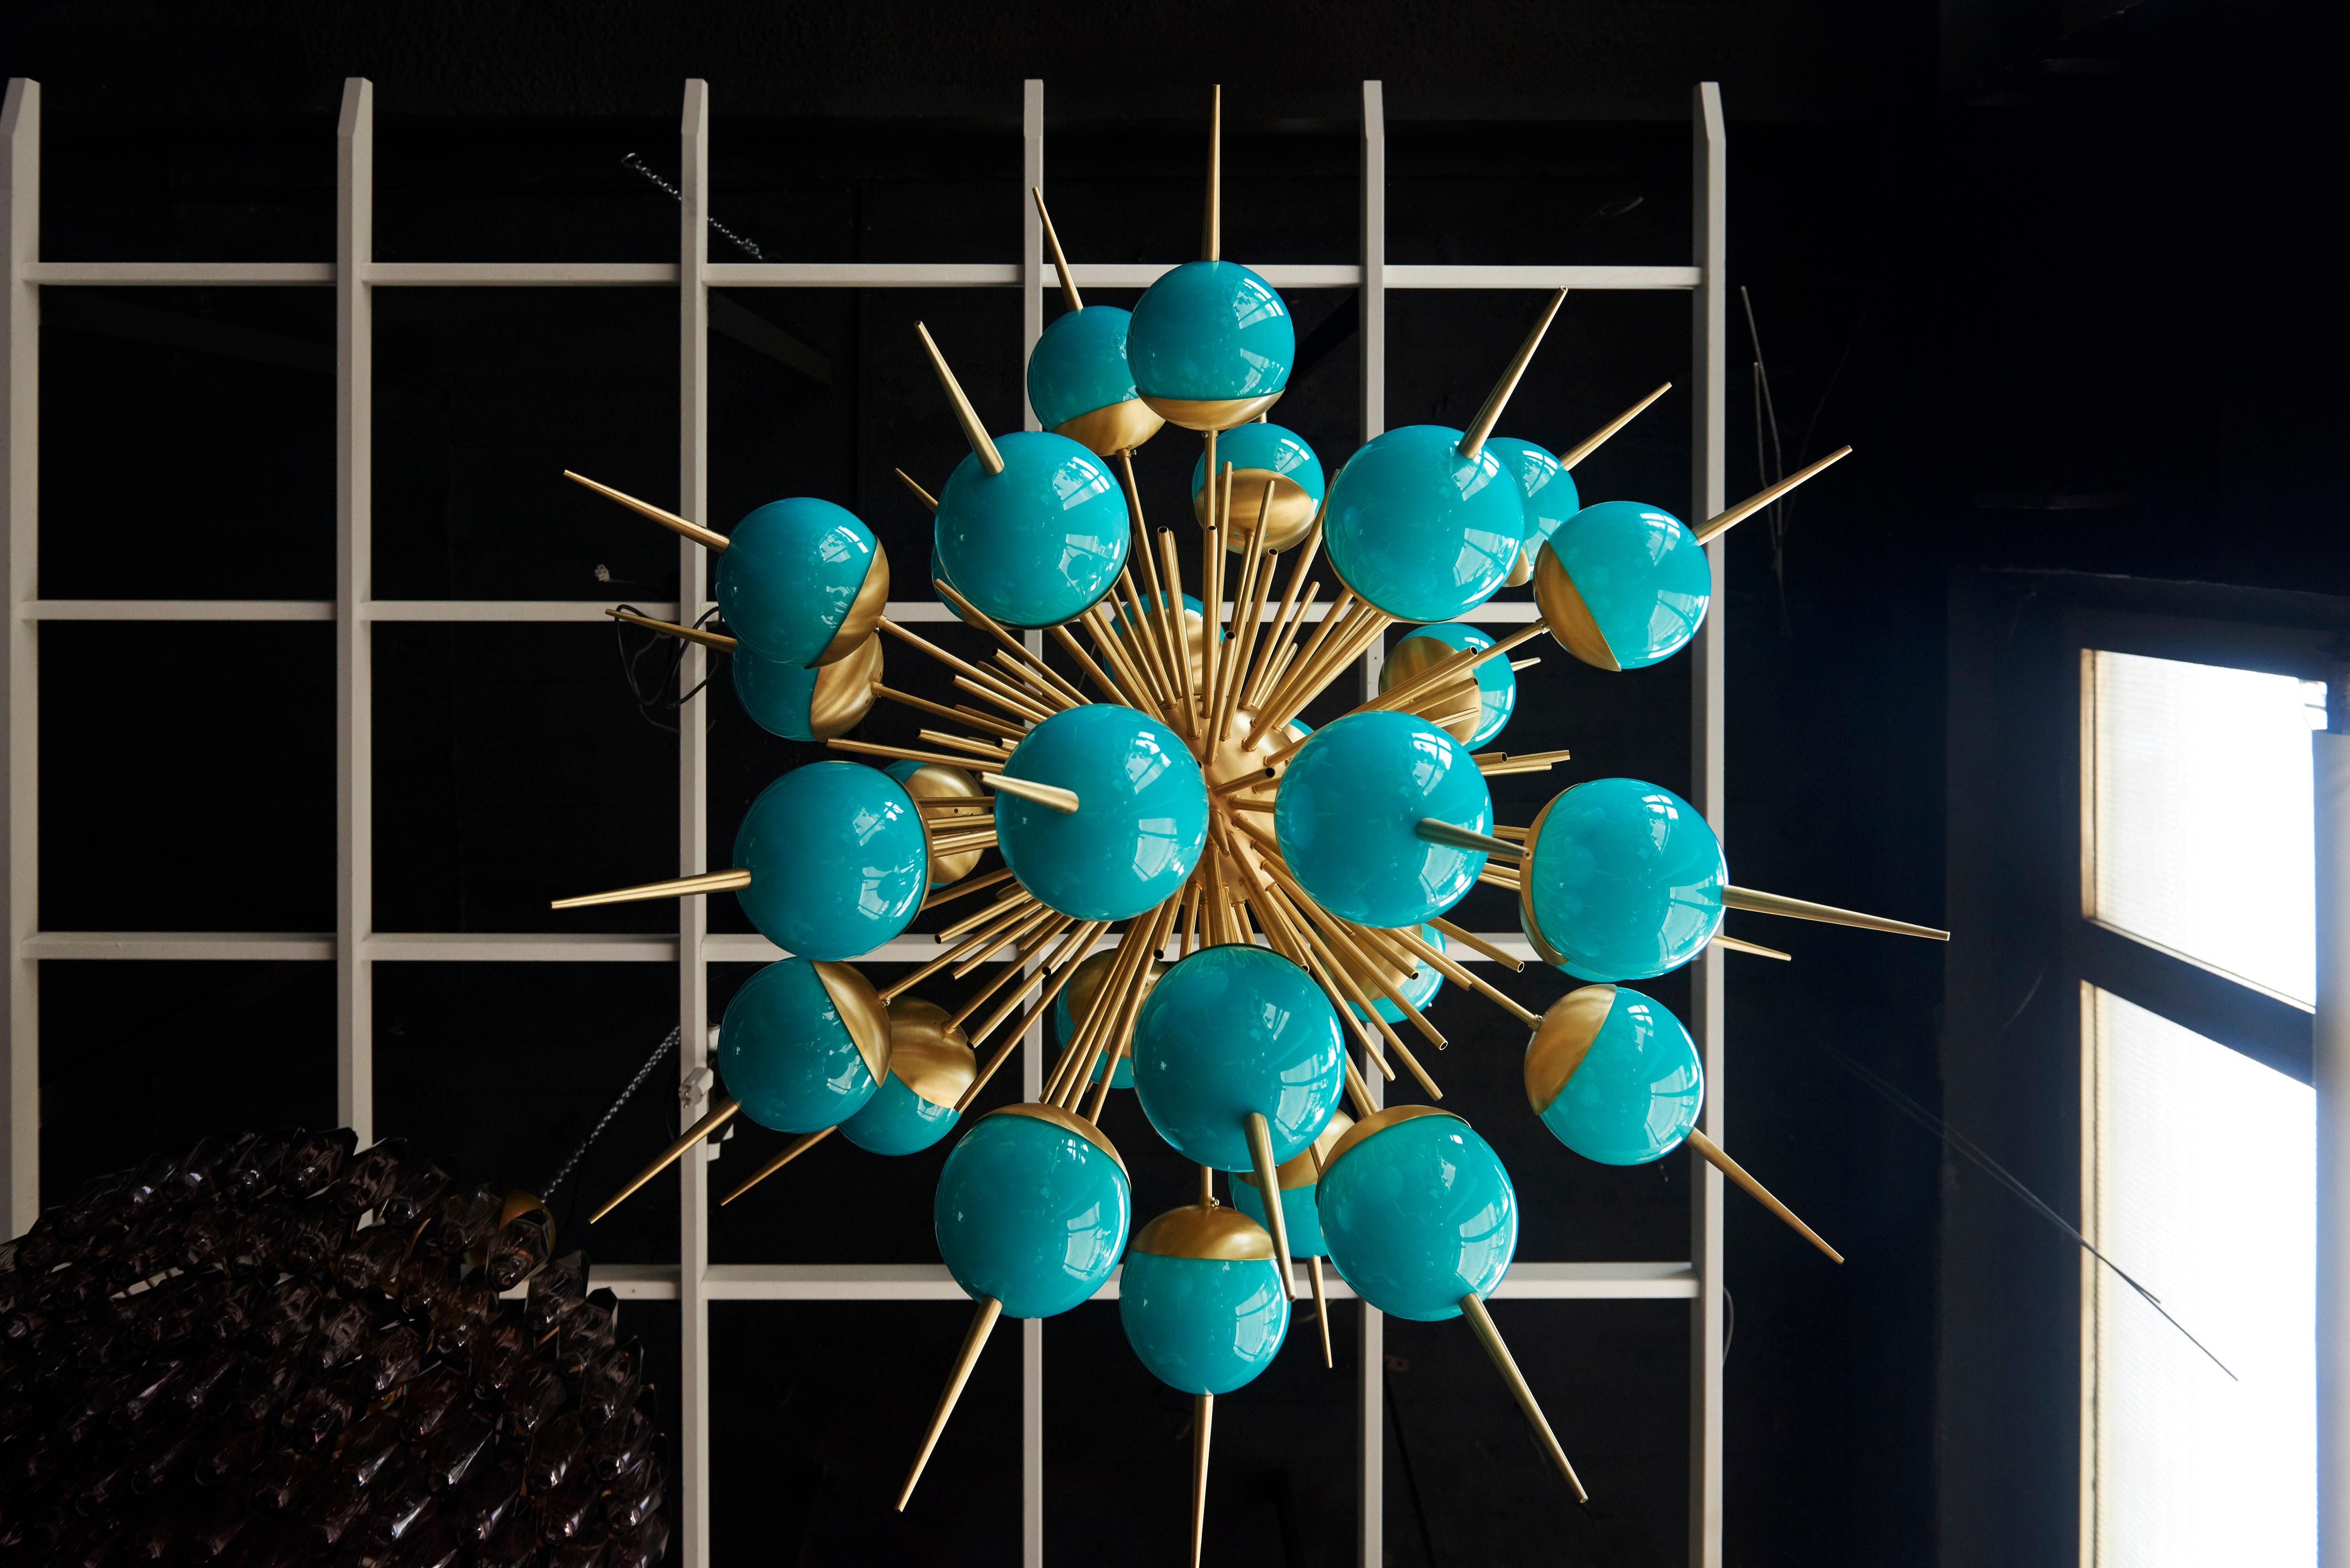 Exceptional huge turquoise color Murano glass and brass sputnik chandeliers. The chandeliers have a very impressing size and they are real eyecatchers in every room. The chandeliers are in excellent condition.

